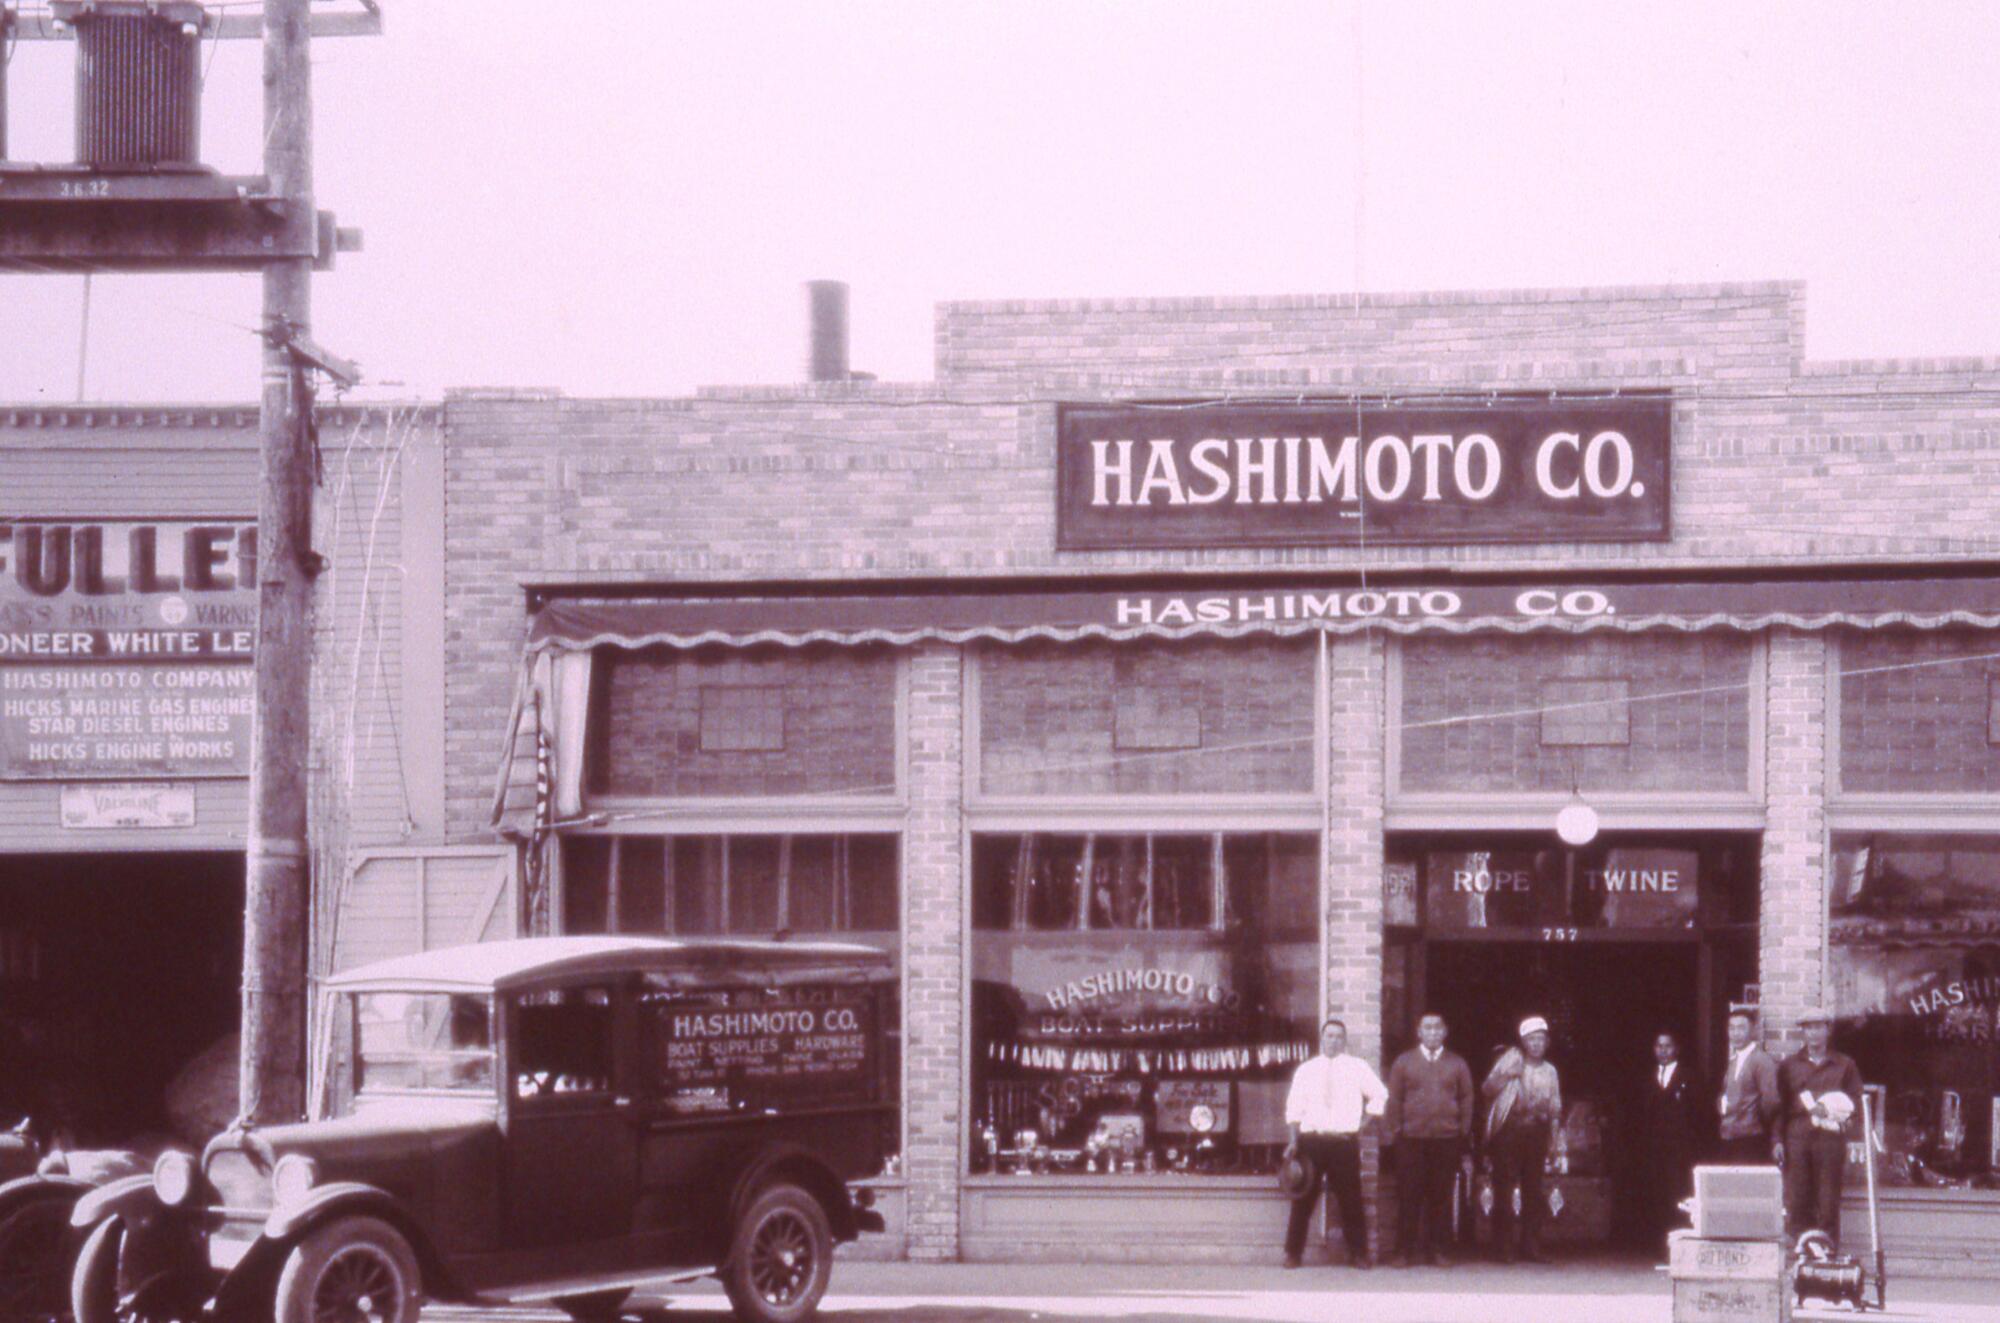 A vintage photo shows a small group of people standing outside a two-story-tall building with a sign that says Hashimoto Co.